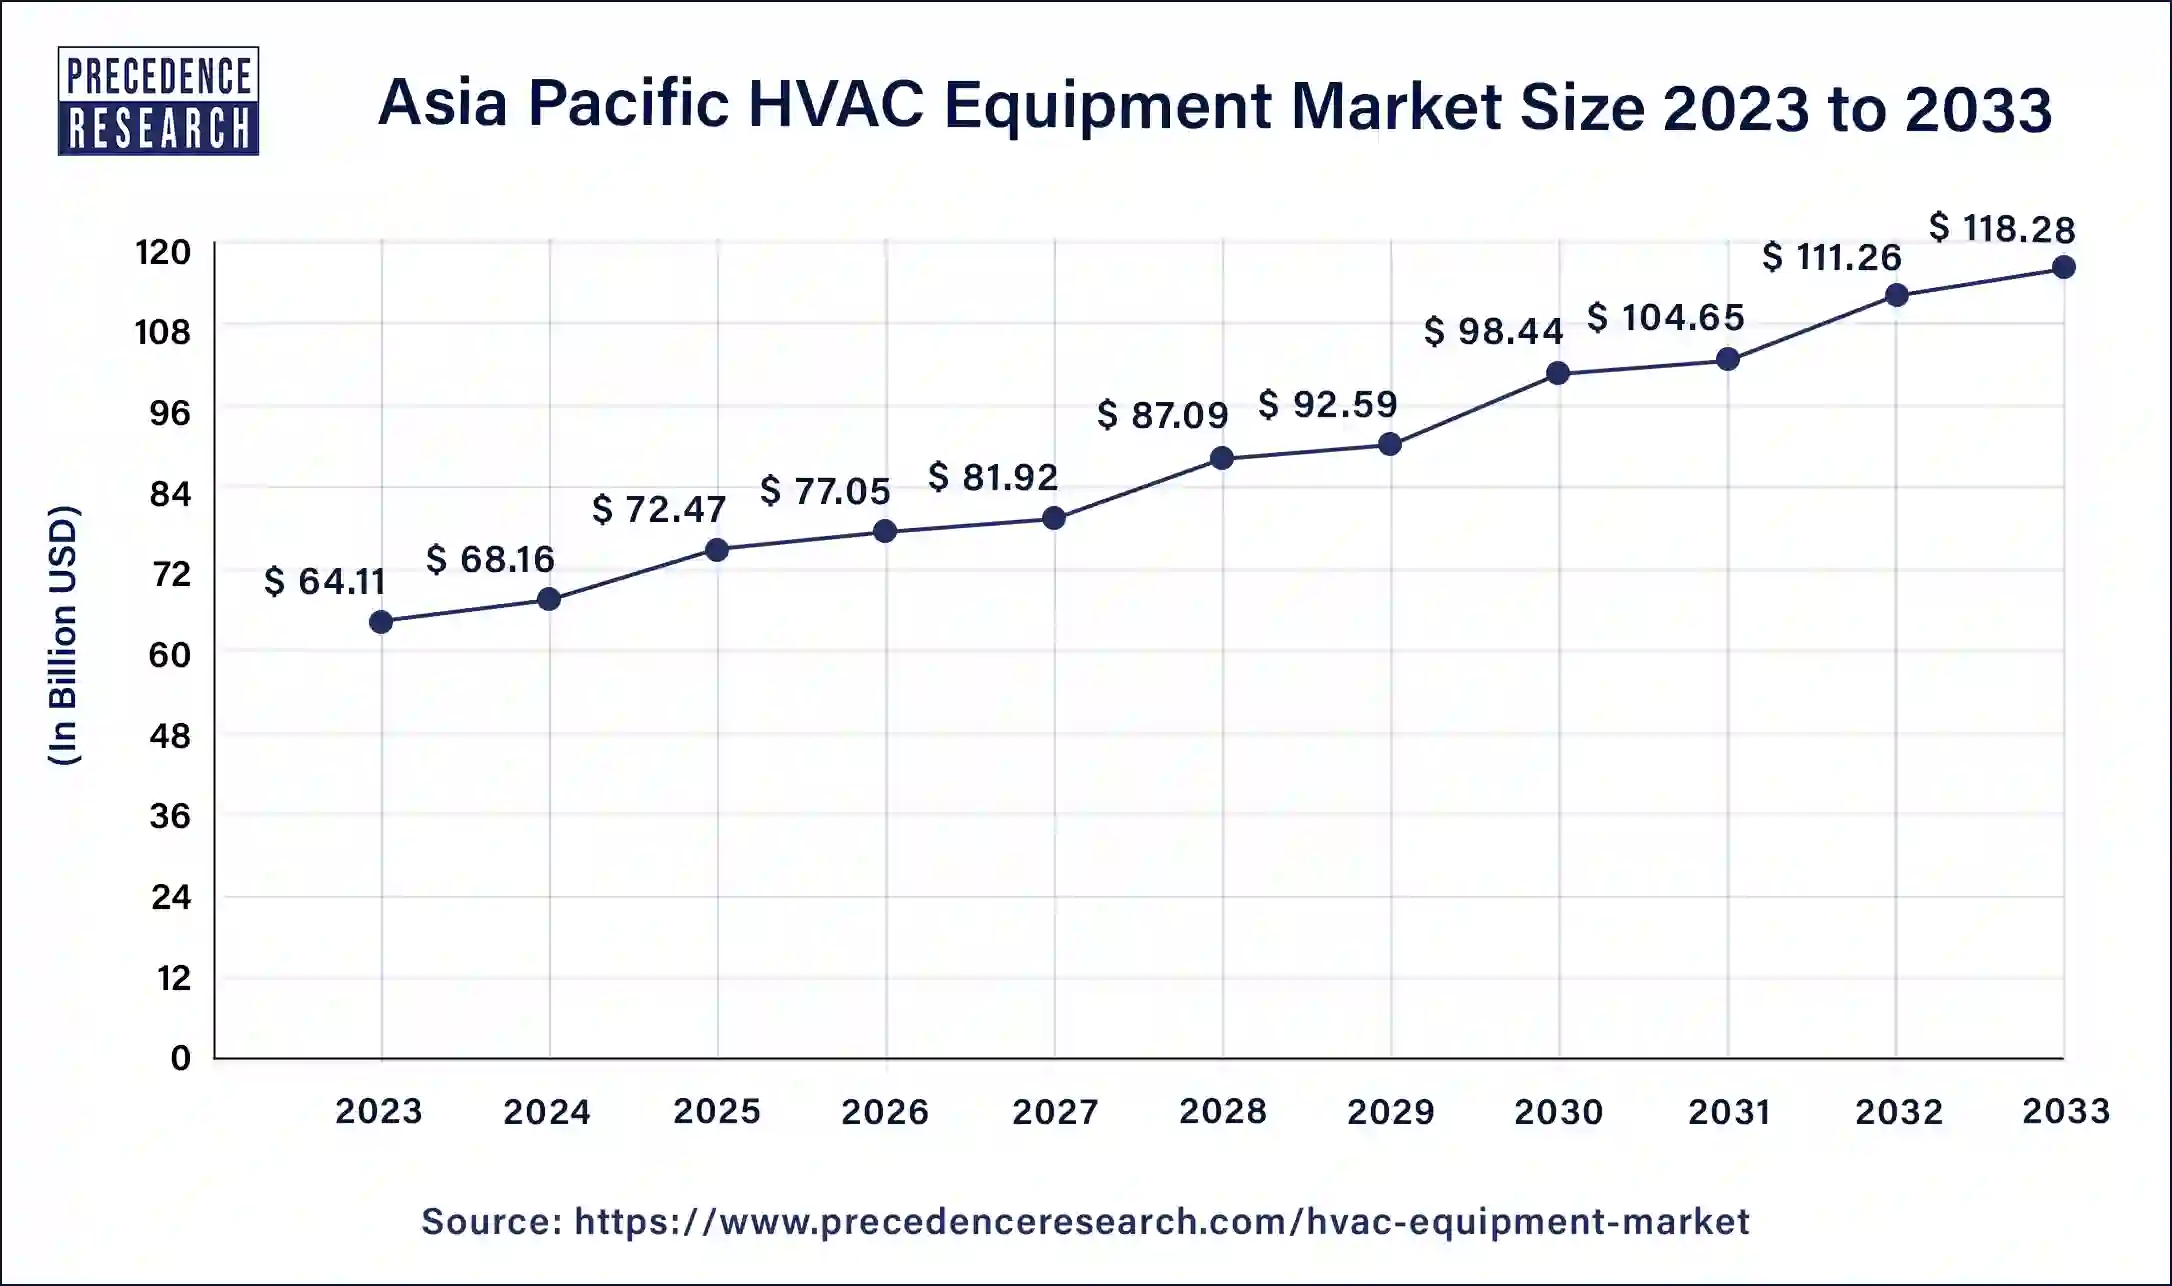 Asia Pacific HVAC Equipment Market Size 2024 to 2033